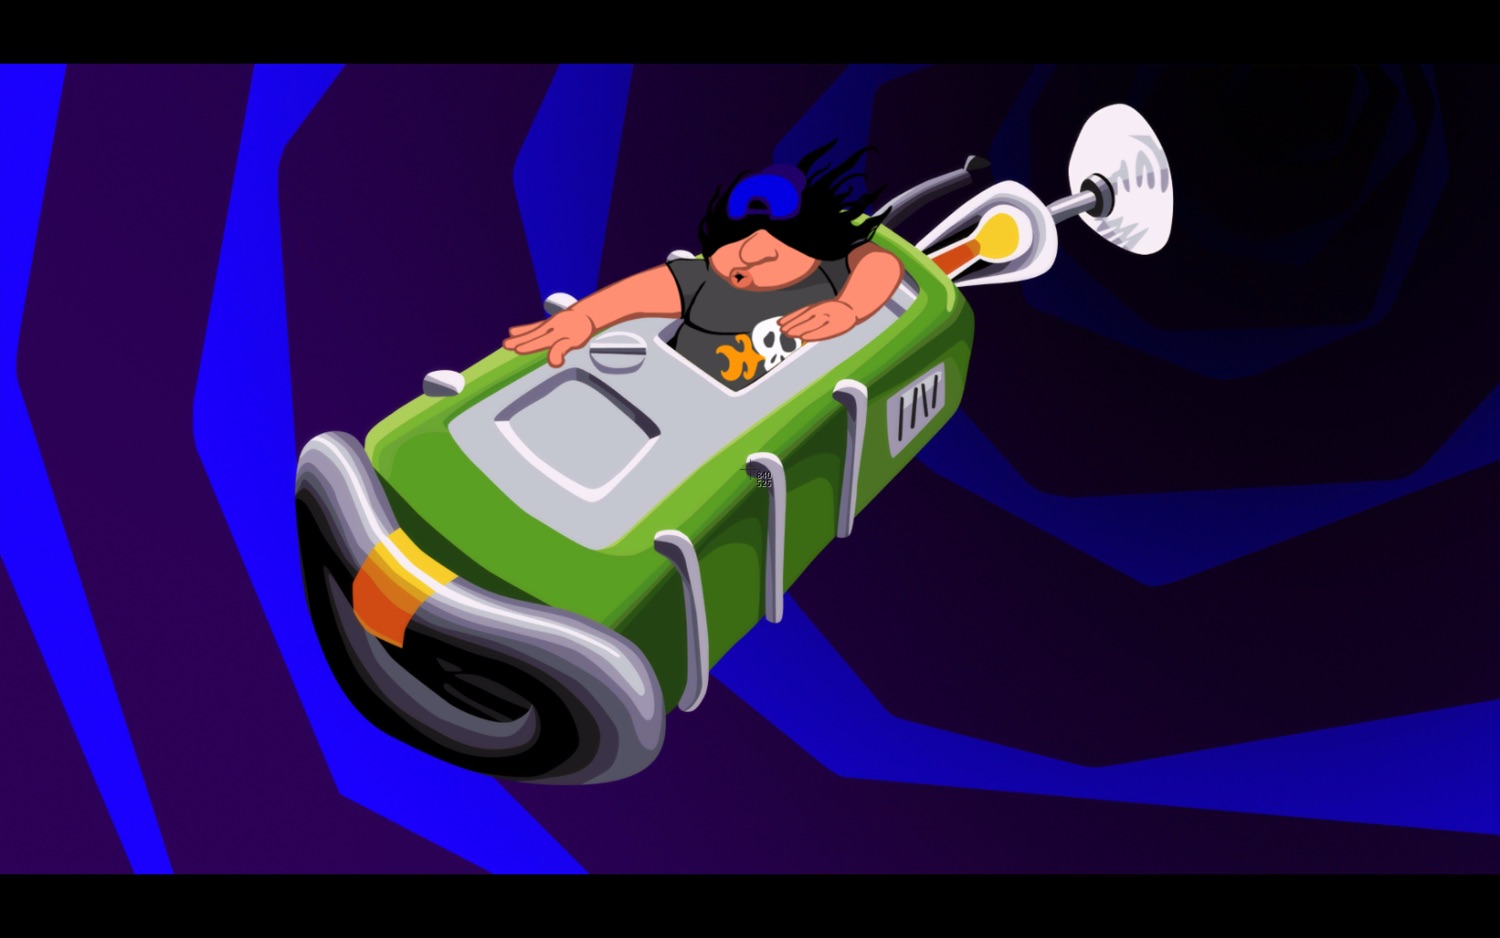 The classic Day of the Tentacle Screenshot. Hoagie is surfing with his head poking out the window of the Chron-o-John as it flies through a blue and purple vortex.